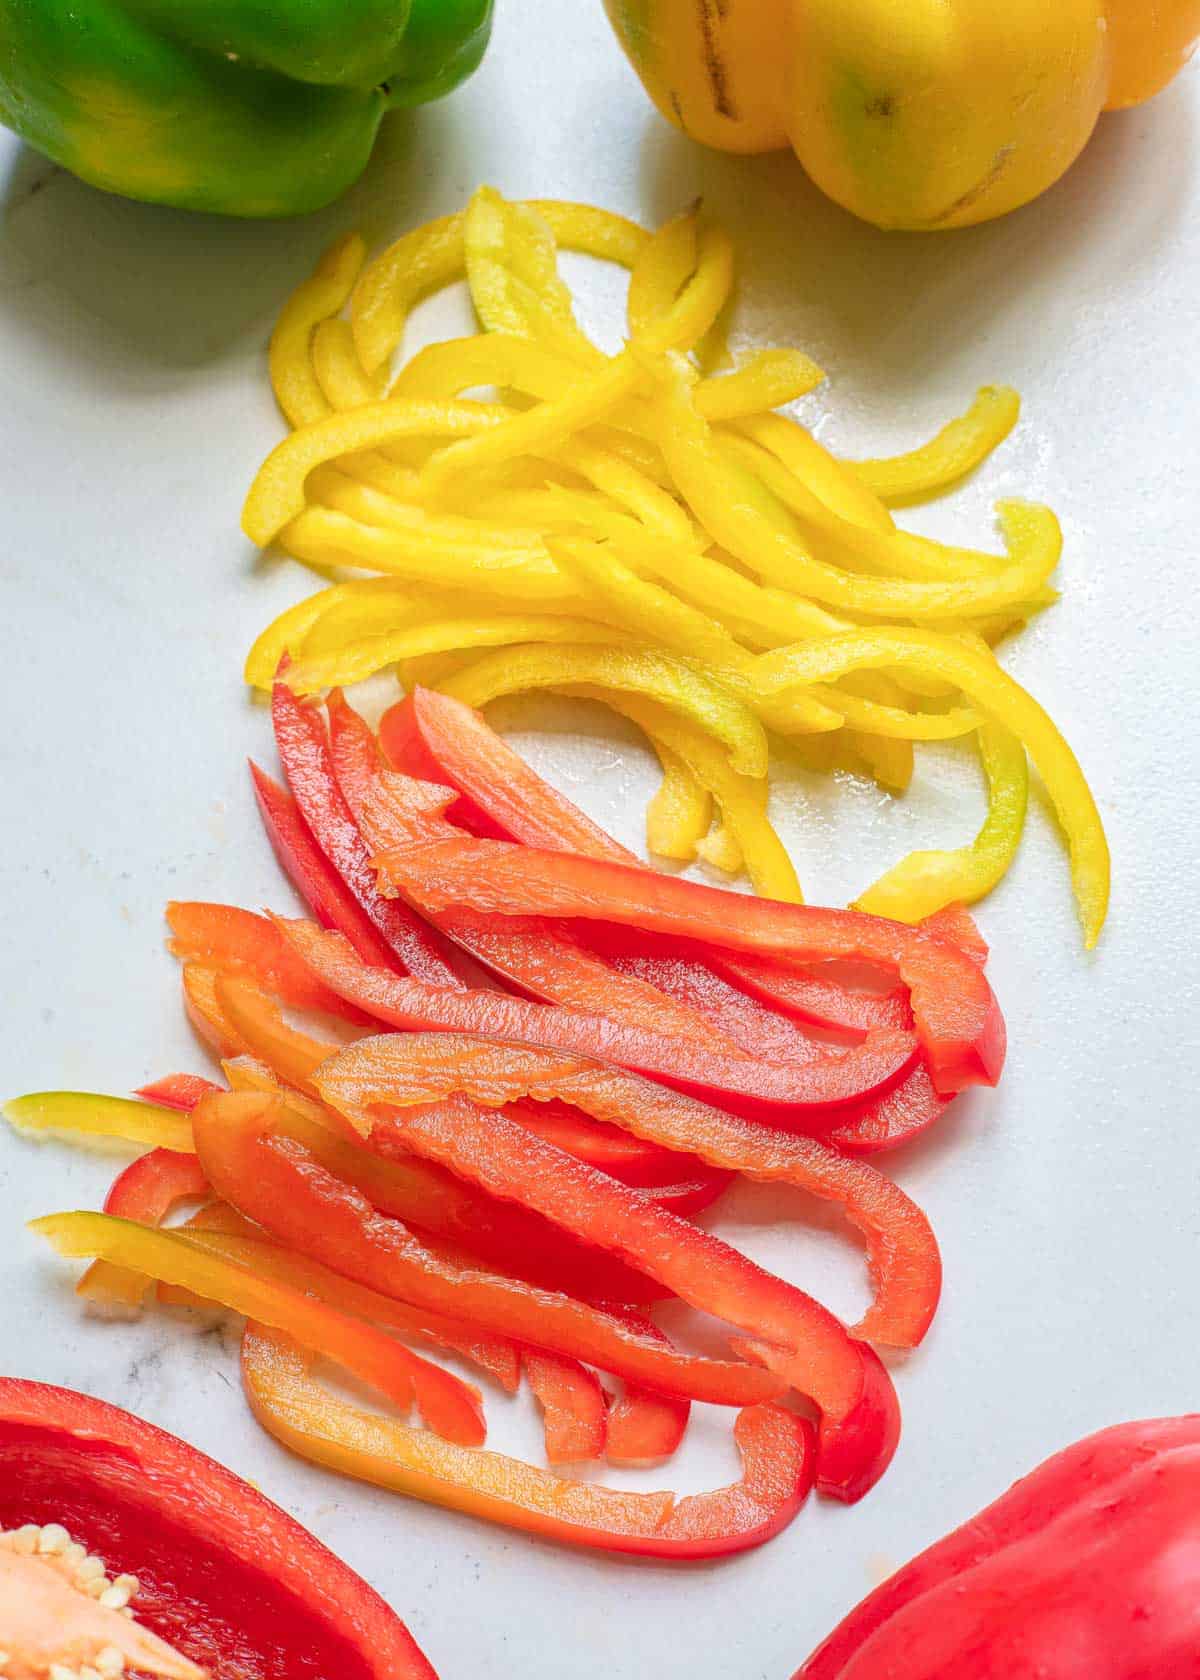 Yellow and red bell peppers cut into strips.